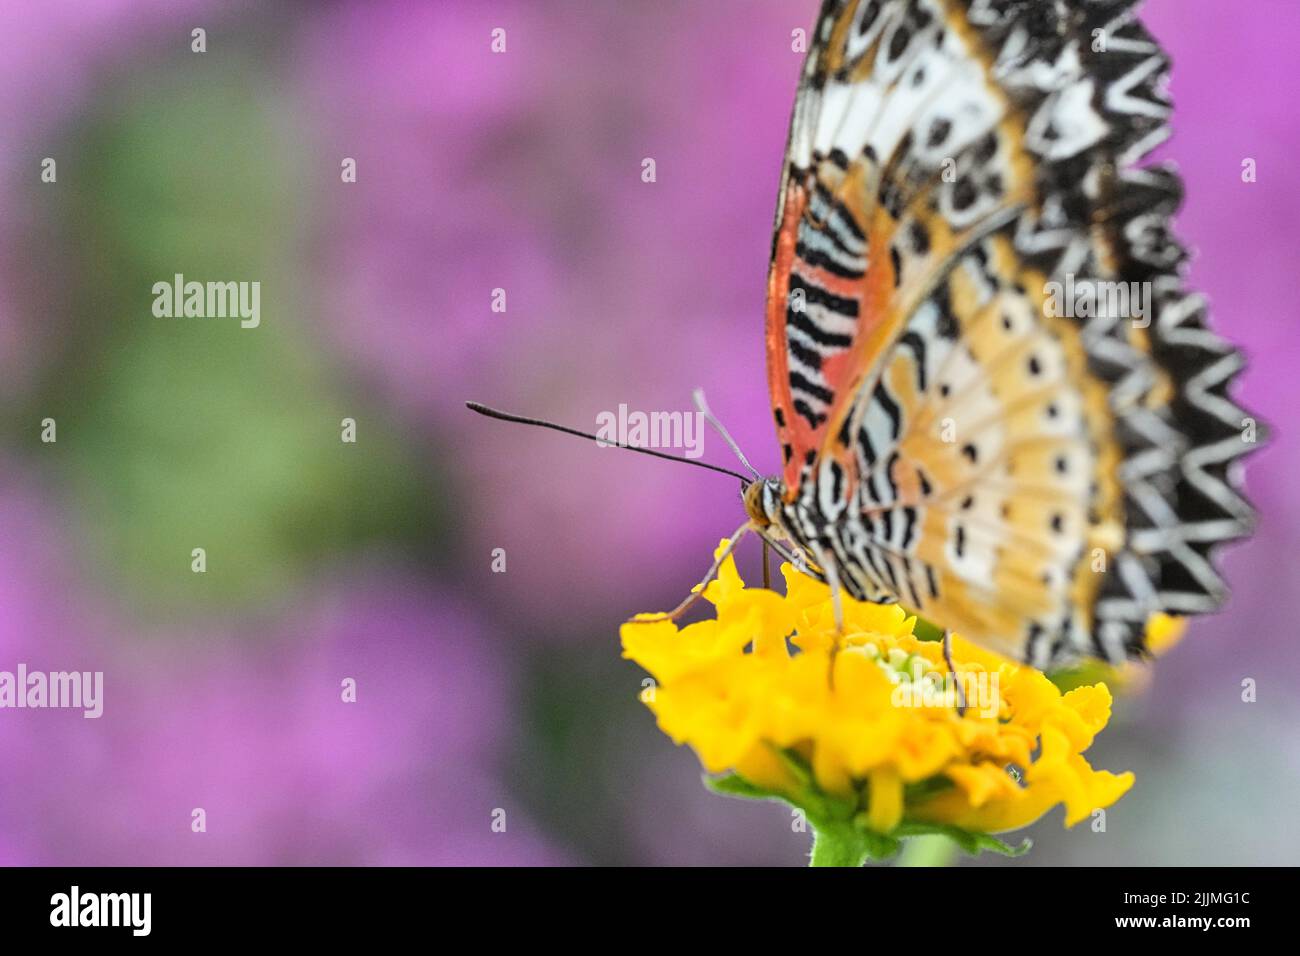 A macro shot of a beautiful butterfly sipping nectar from a yellow flower against a purple background Stock Photo